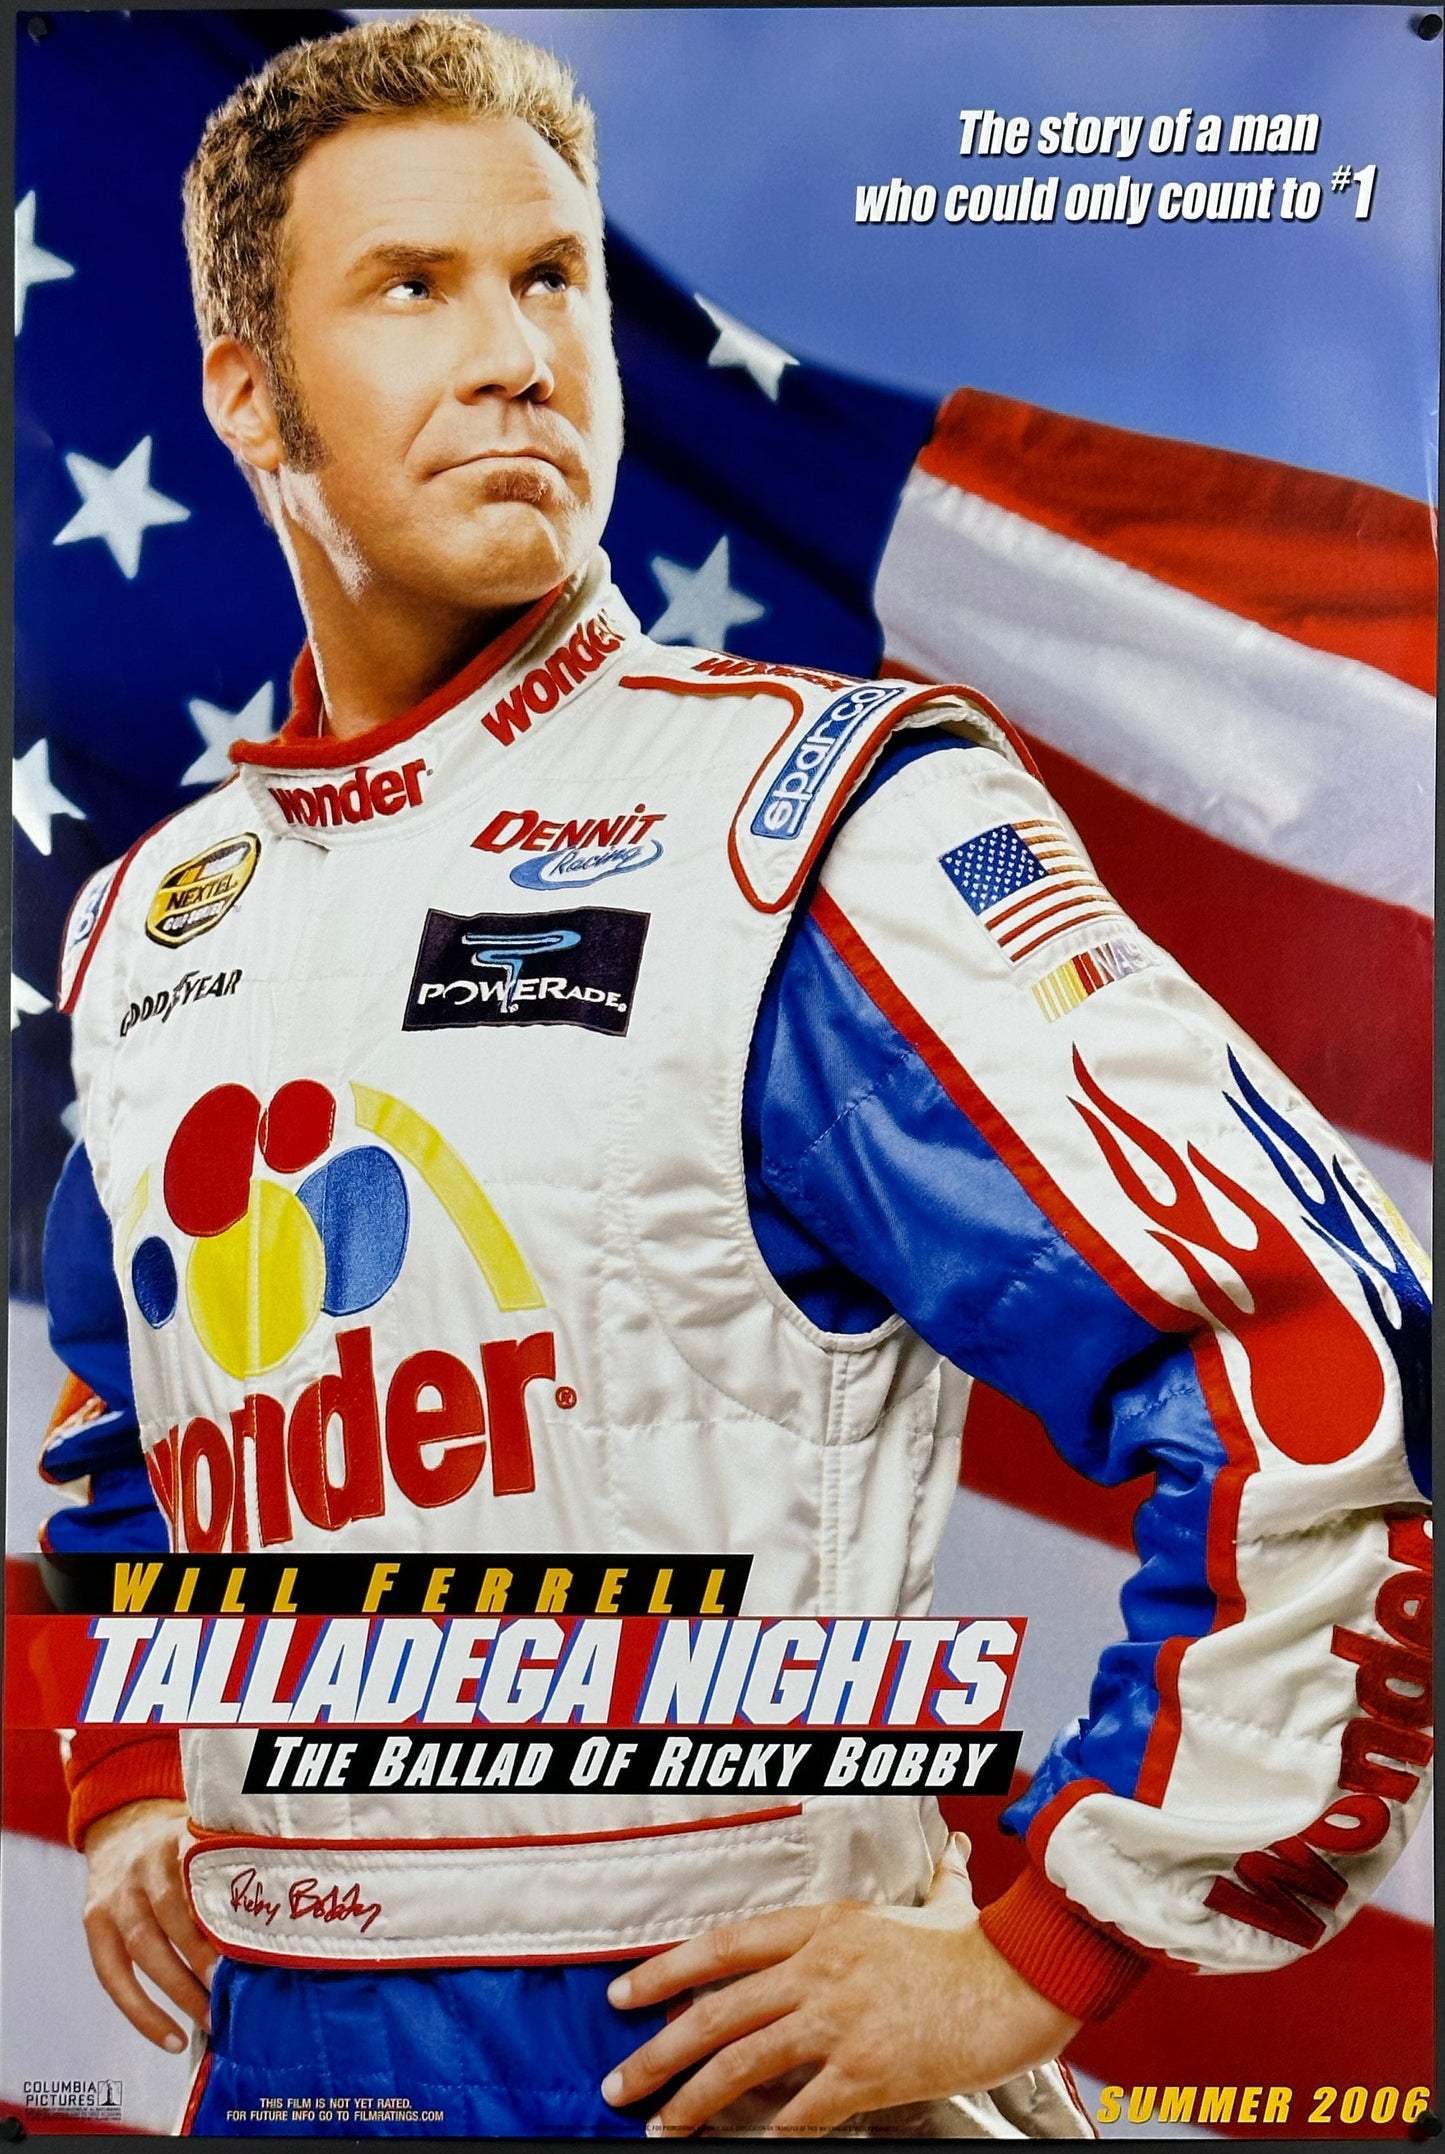 Talladega Nights: The Ballad of Ricky Bobby US One Sheet Teaser Style (2006) - ORIGINAL RELEASE - posterpalace.com